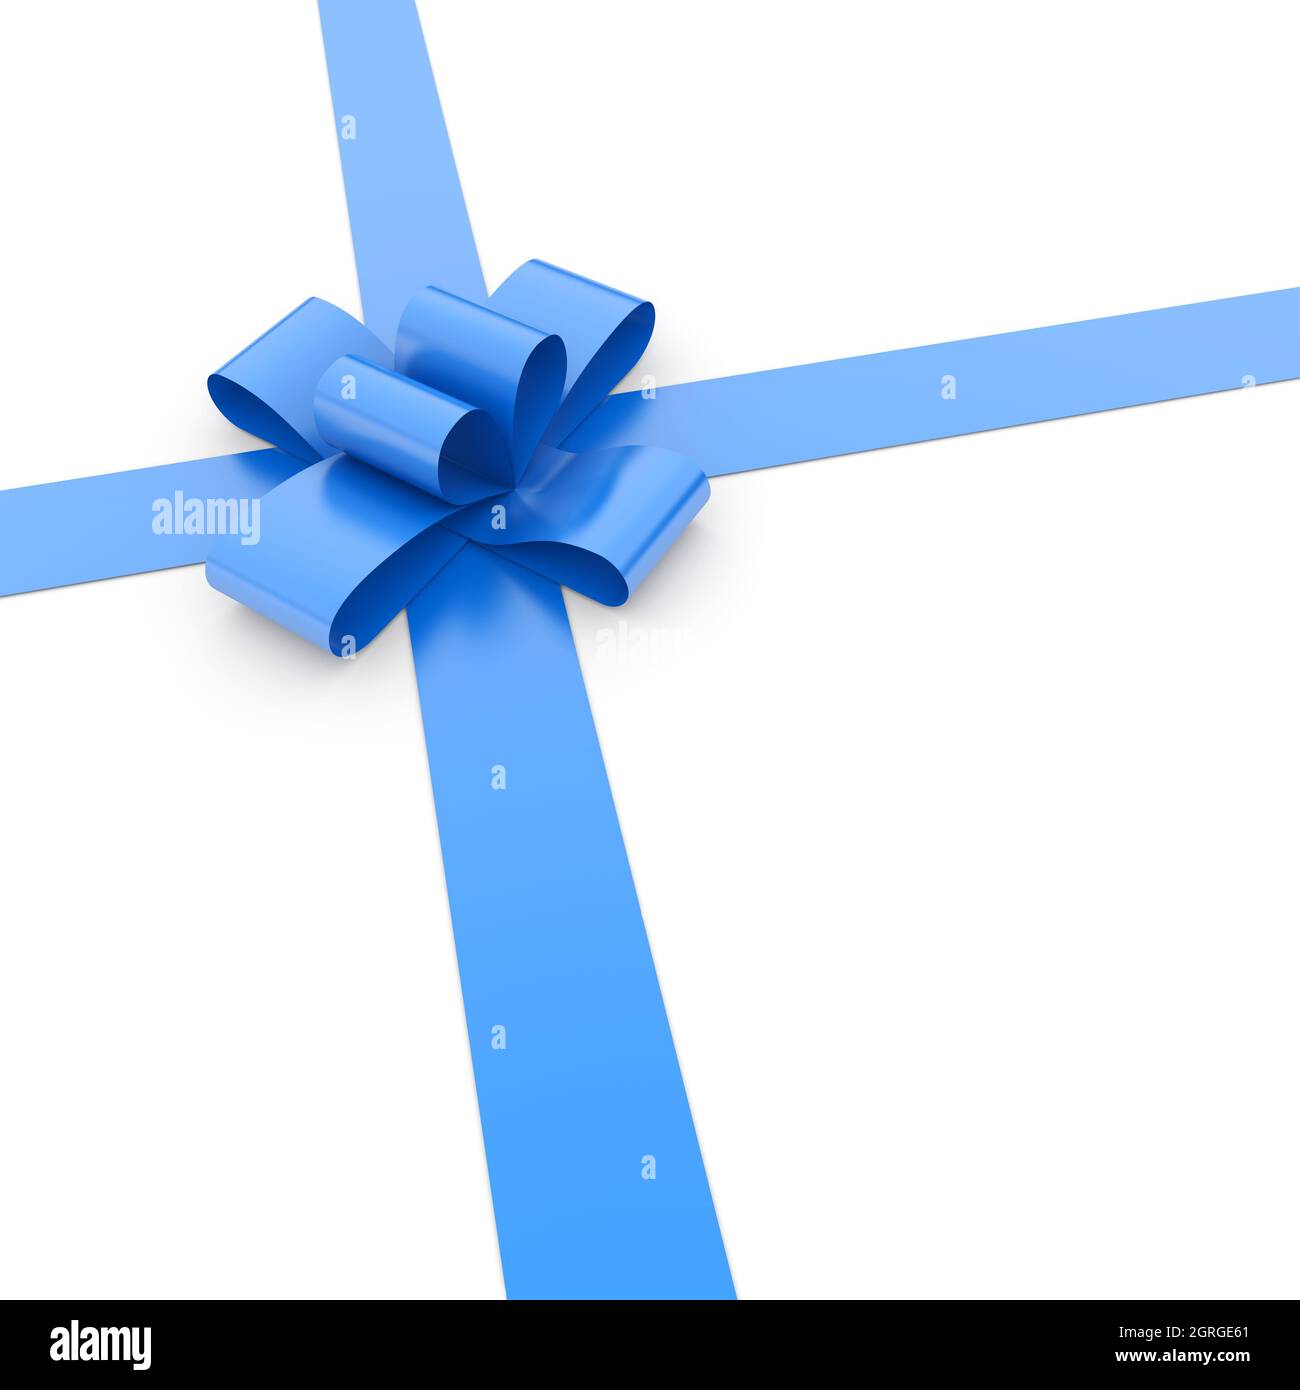 179,101 Light Blue Ribbon Images, Stock Photos, 3D objects